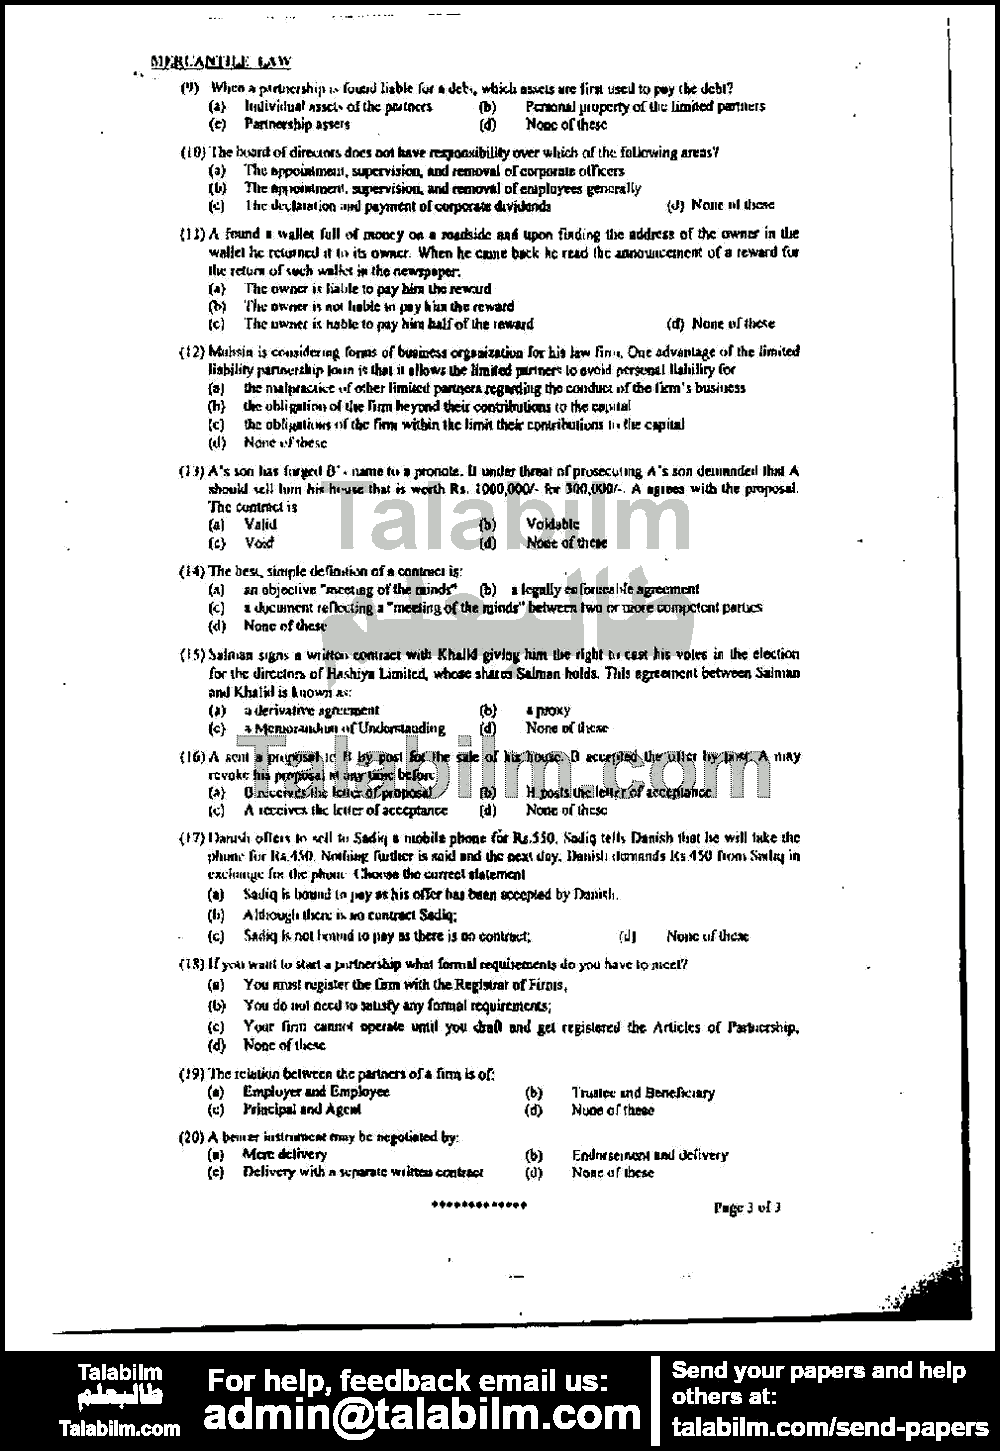 Mercantile Law 0 past paper for 2005 Page No. 3